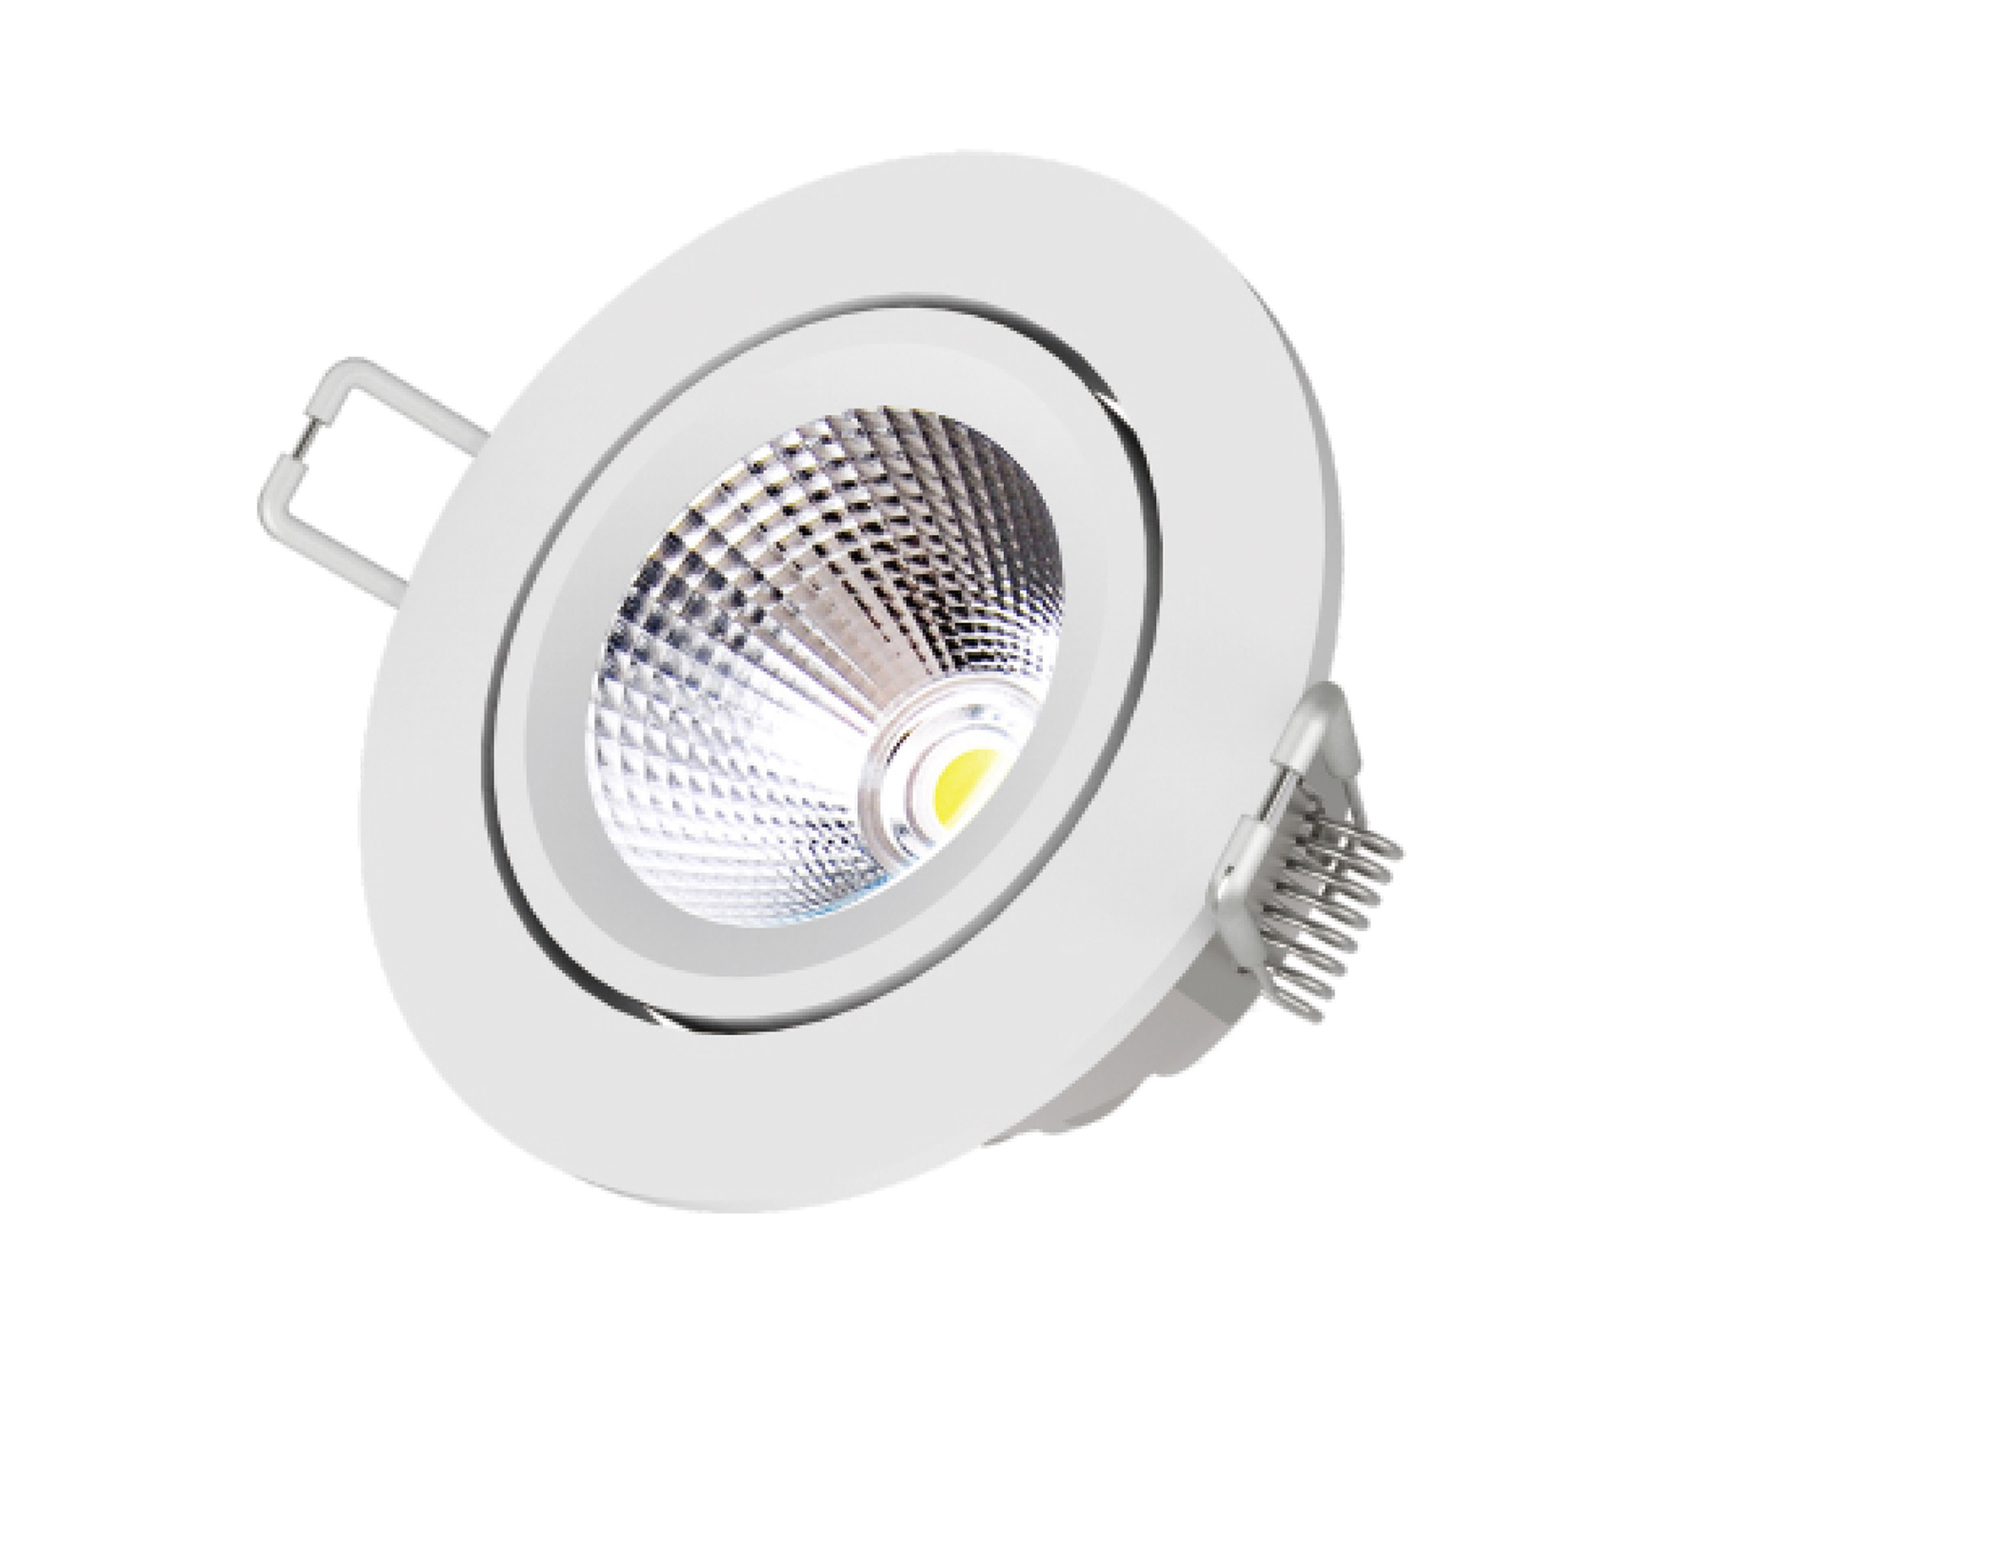 SD-06R-Y  Smart Spot light, RF 2.4GHz, 6W, Dimmable, 3000K, 24 degree beam angle, 200-240Vac, F75mm cut-out, IP20.